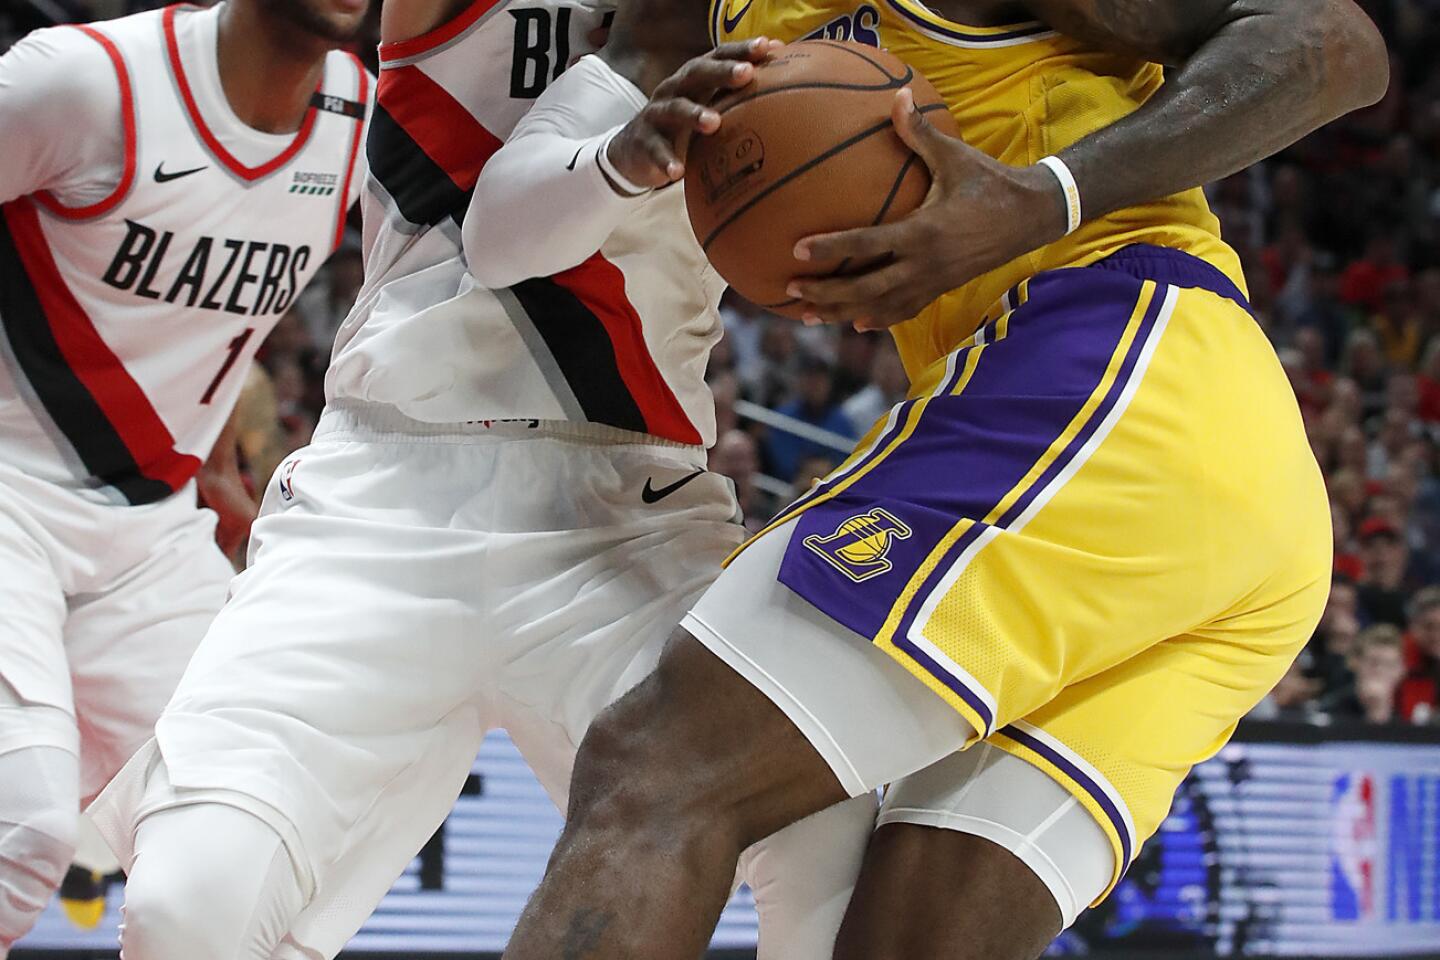 Lakers Lose to Trail Blazers in LeBron James's Debut - The New